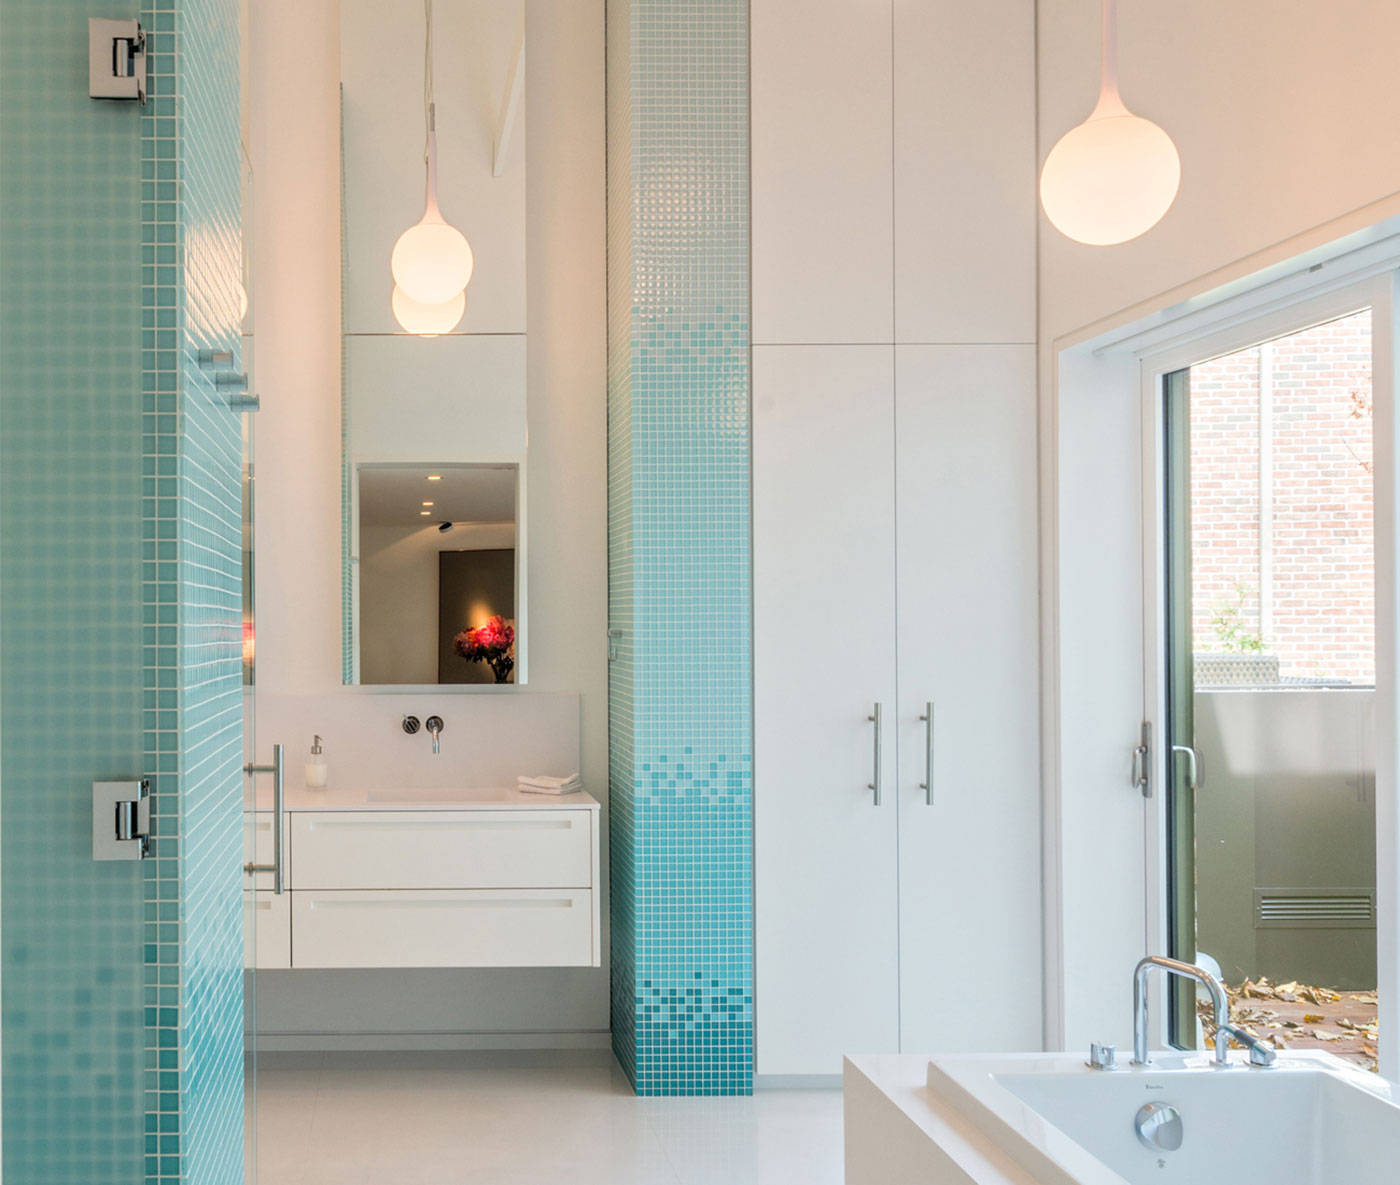 Bathroom reno inspired by luxury hotels - architect Cindy Rendely